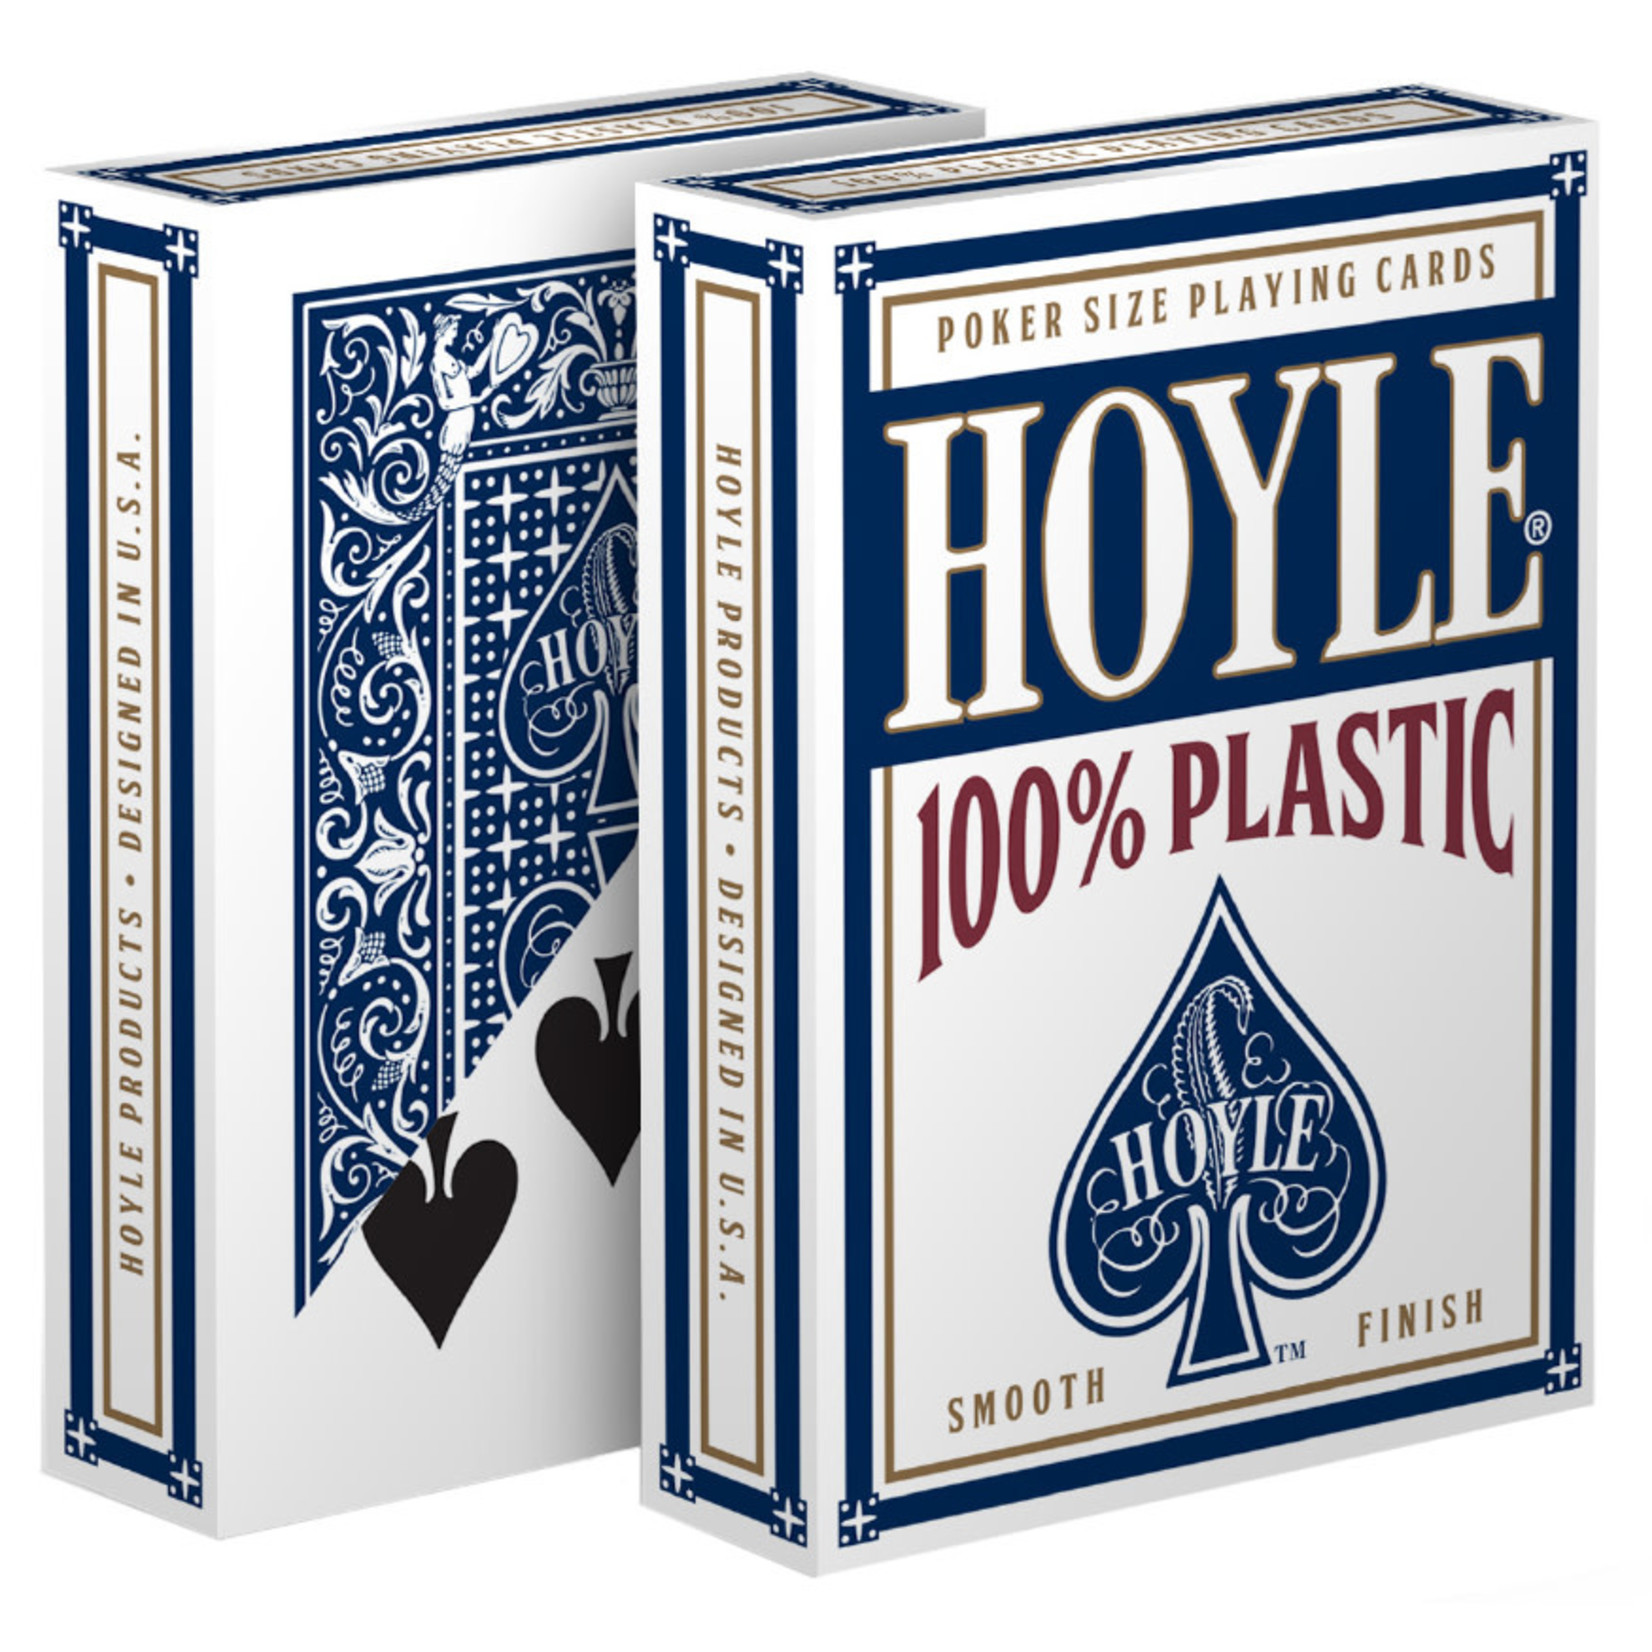 The United States Playing Card Company Hoyle 100% Plastic Playing Cards